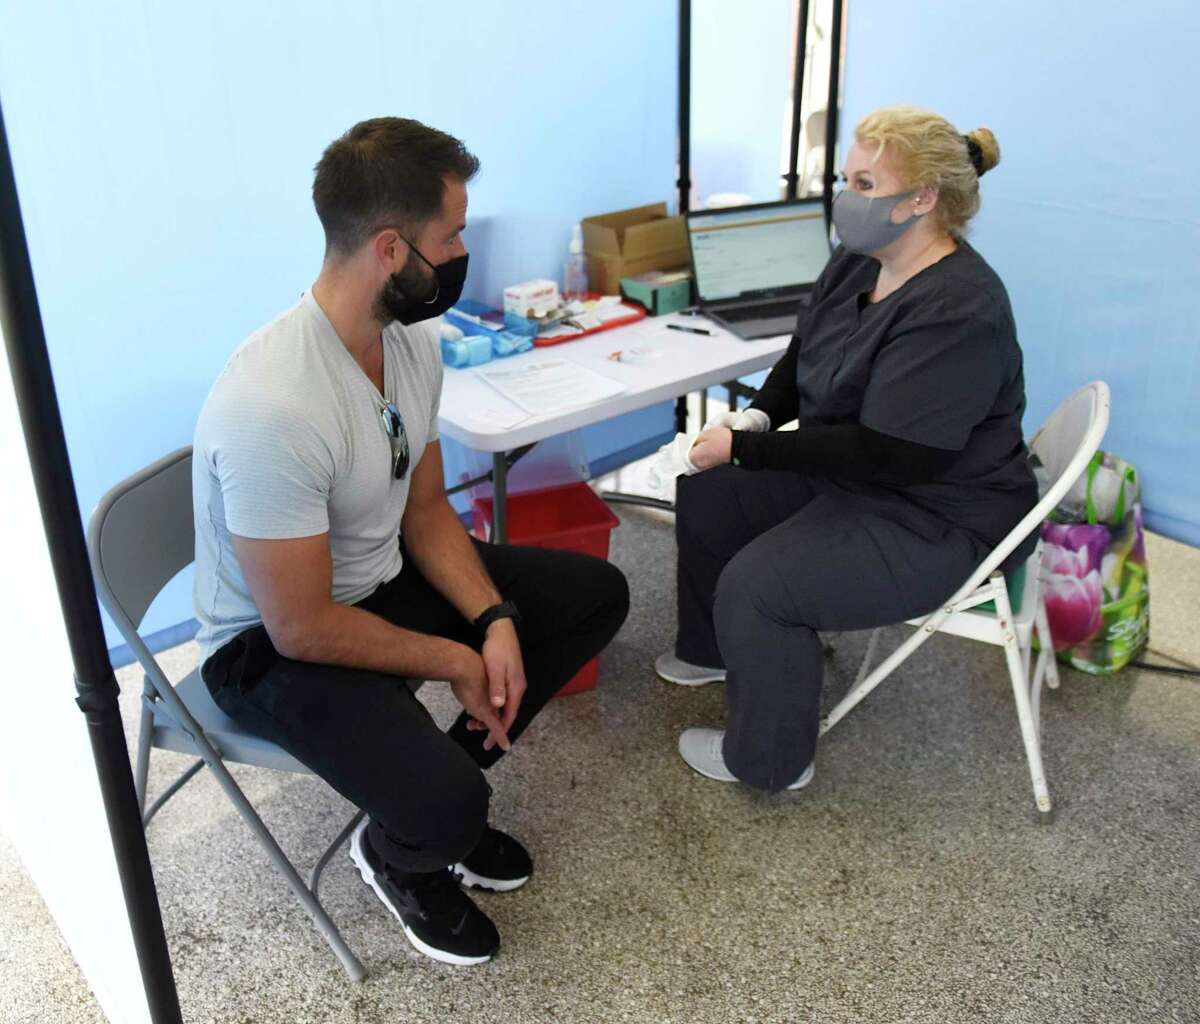 Chistine Plateroti, LPN, chats with Greenwich’s Dan Agostino before administering the COVID-19 vaccine at the Family Centers Vaccination Clinic at the Eastern Greenwich Civic Center.